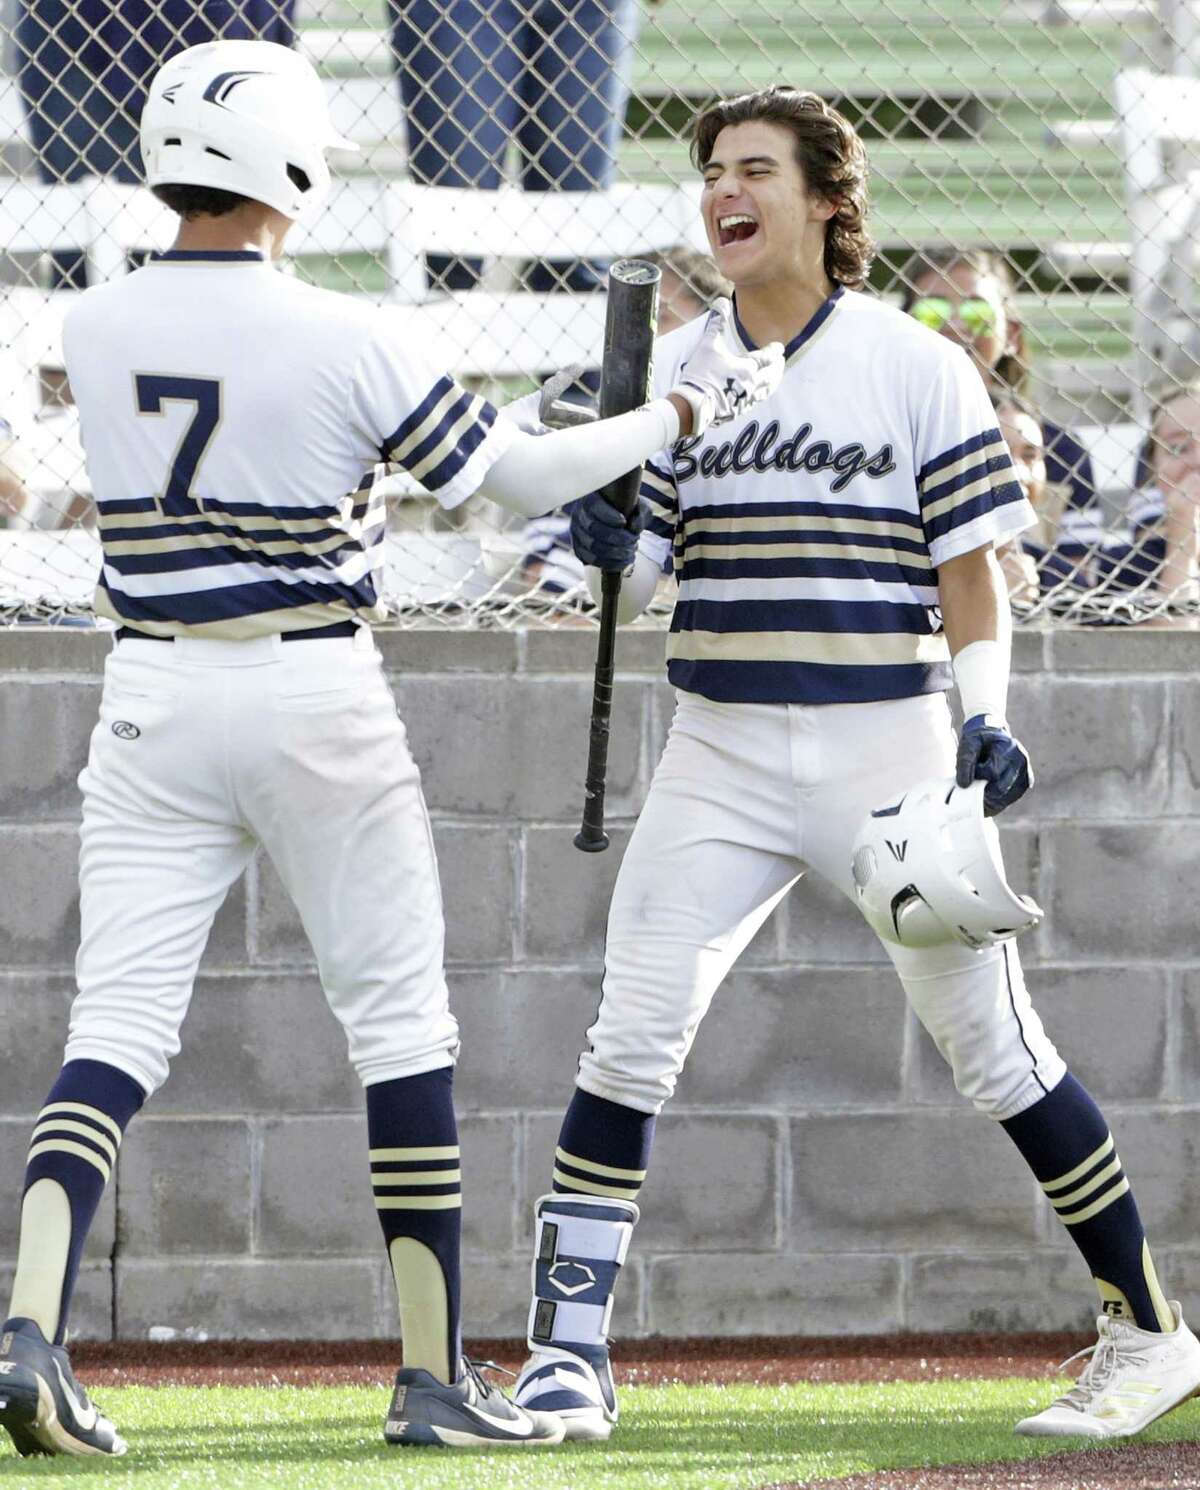 Normar Garcia, right, celebrates his two run homer in the fourth inning as the bats come alive for the Bulldogs who beat Reagan 9-8 in game 2 of the Class 6A Regional Semifinals at Cabaniss Field in Corpus Christi on May 24, 2019.